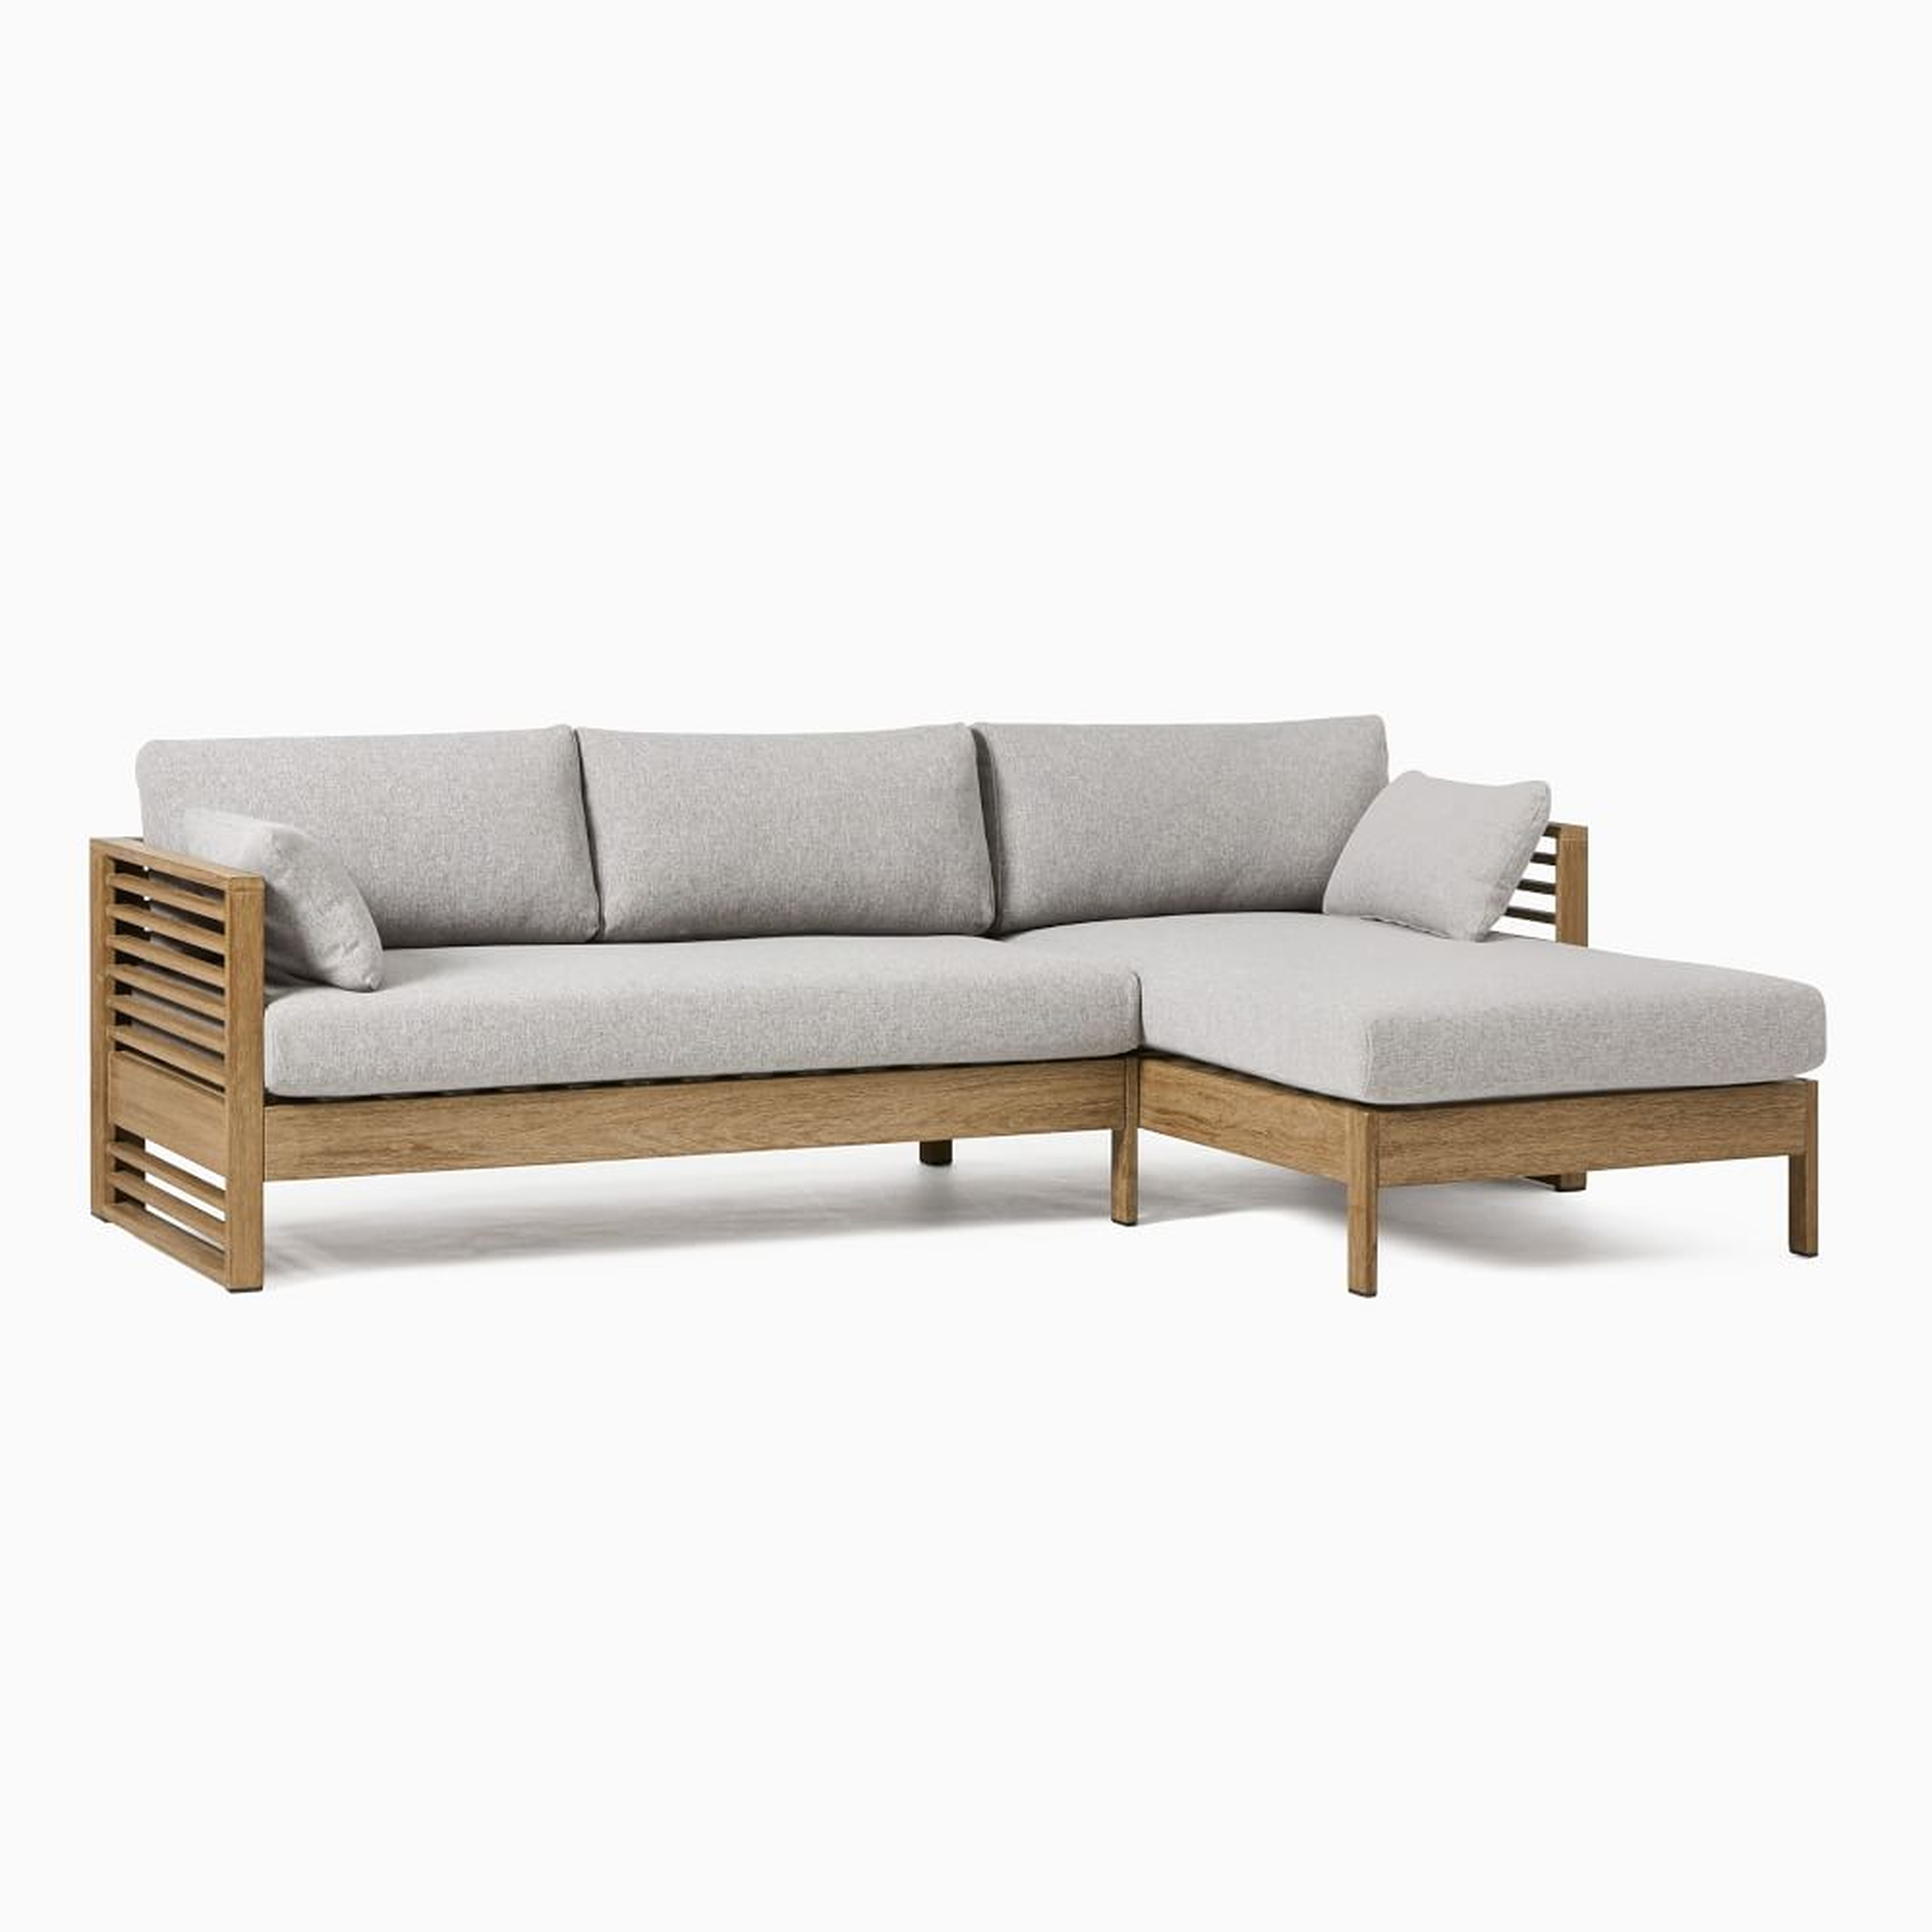 Santa Fe Slatted Outdoor 95 in 2-Piece Chaise Sectional, Driftwood - West Elm